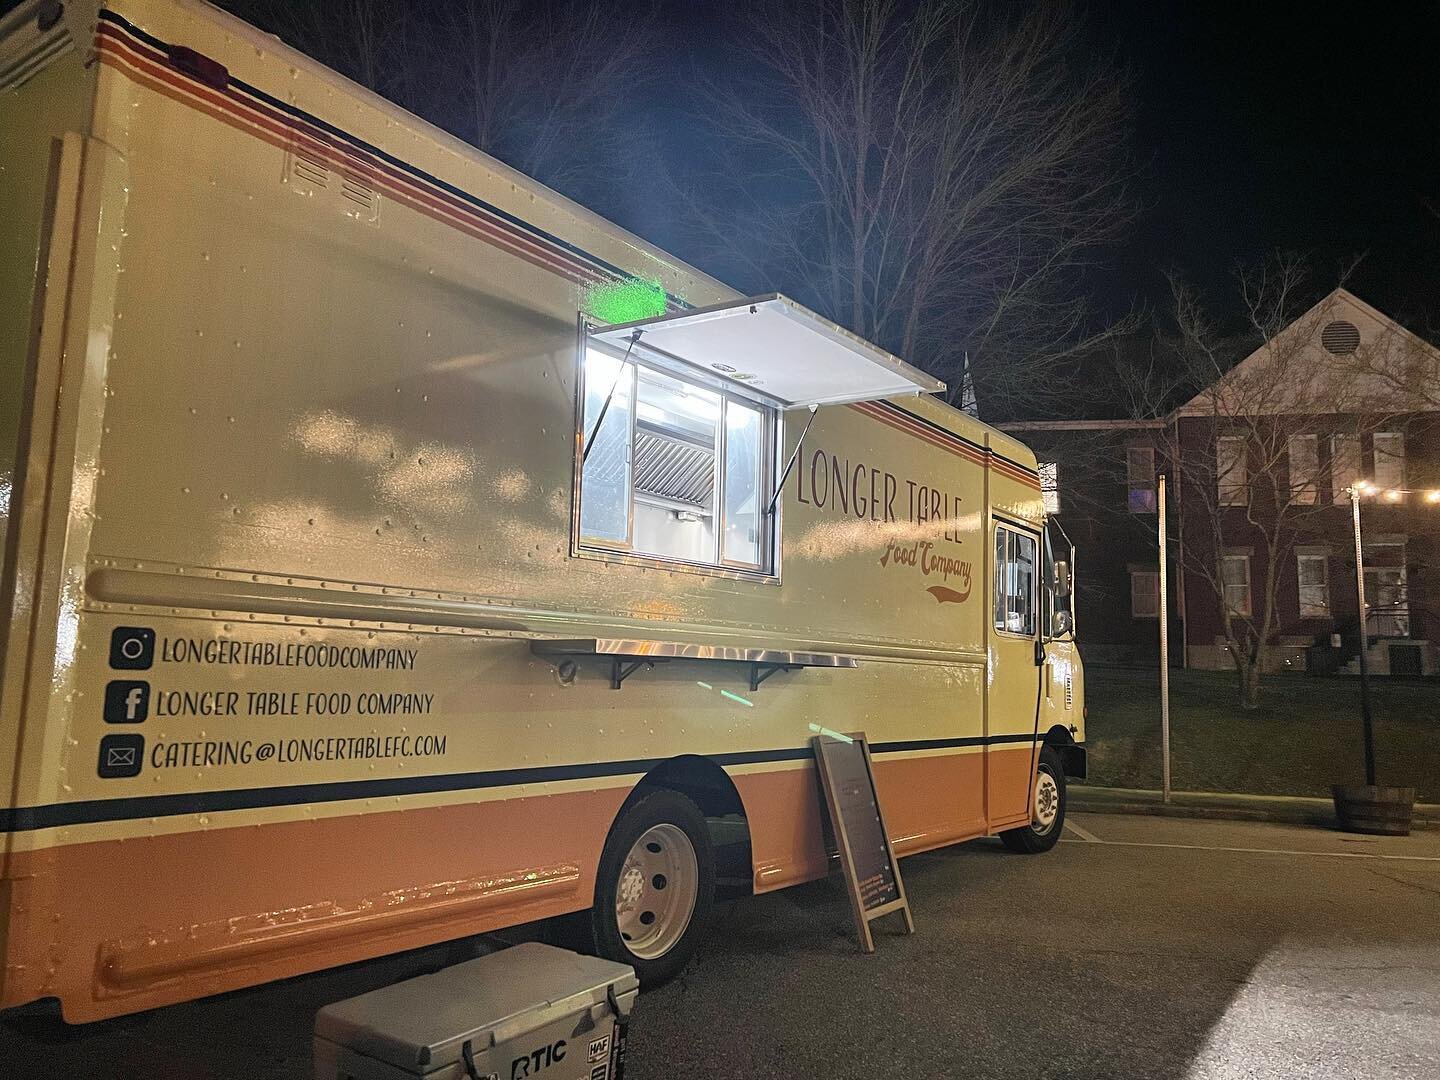 ⭐️morehead folks⭐️ 
We are coming at you tomorrow night with a PASTA NIGHT! Don&rsquo;t miss it!! 
Come find us at @sawstonebrewingco from 6-8ish. We can&rsquo;t wait to see your friendly faces and have a beautiful warm evening! 

⬇️Tomorrow&rsquo;s 